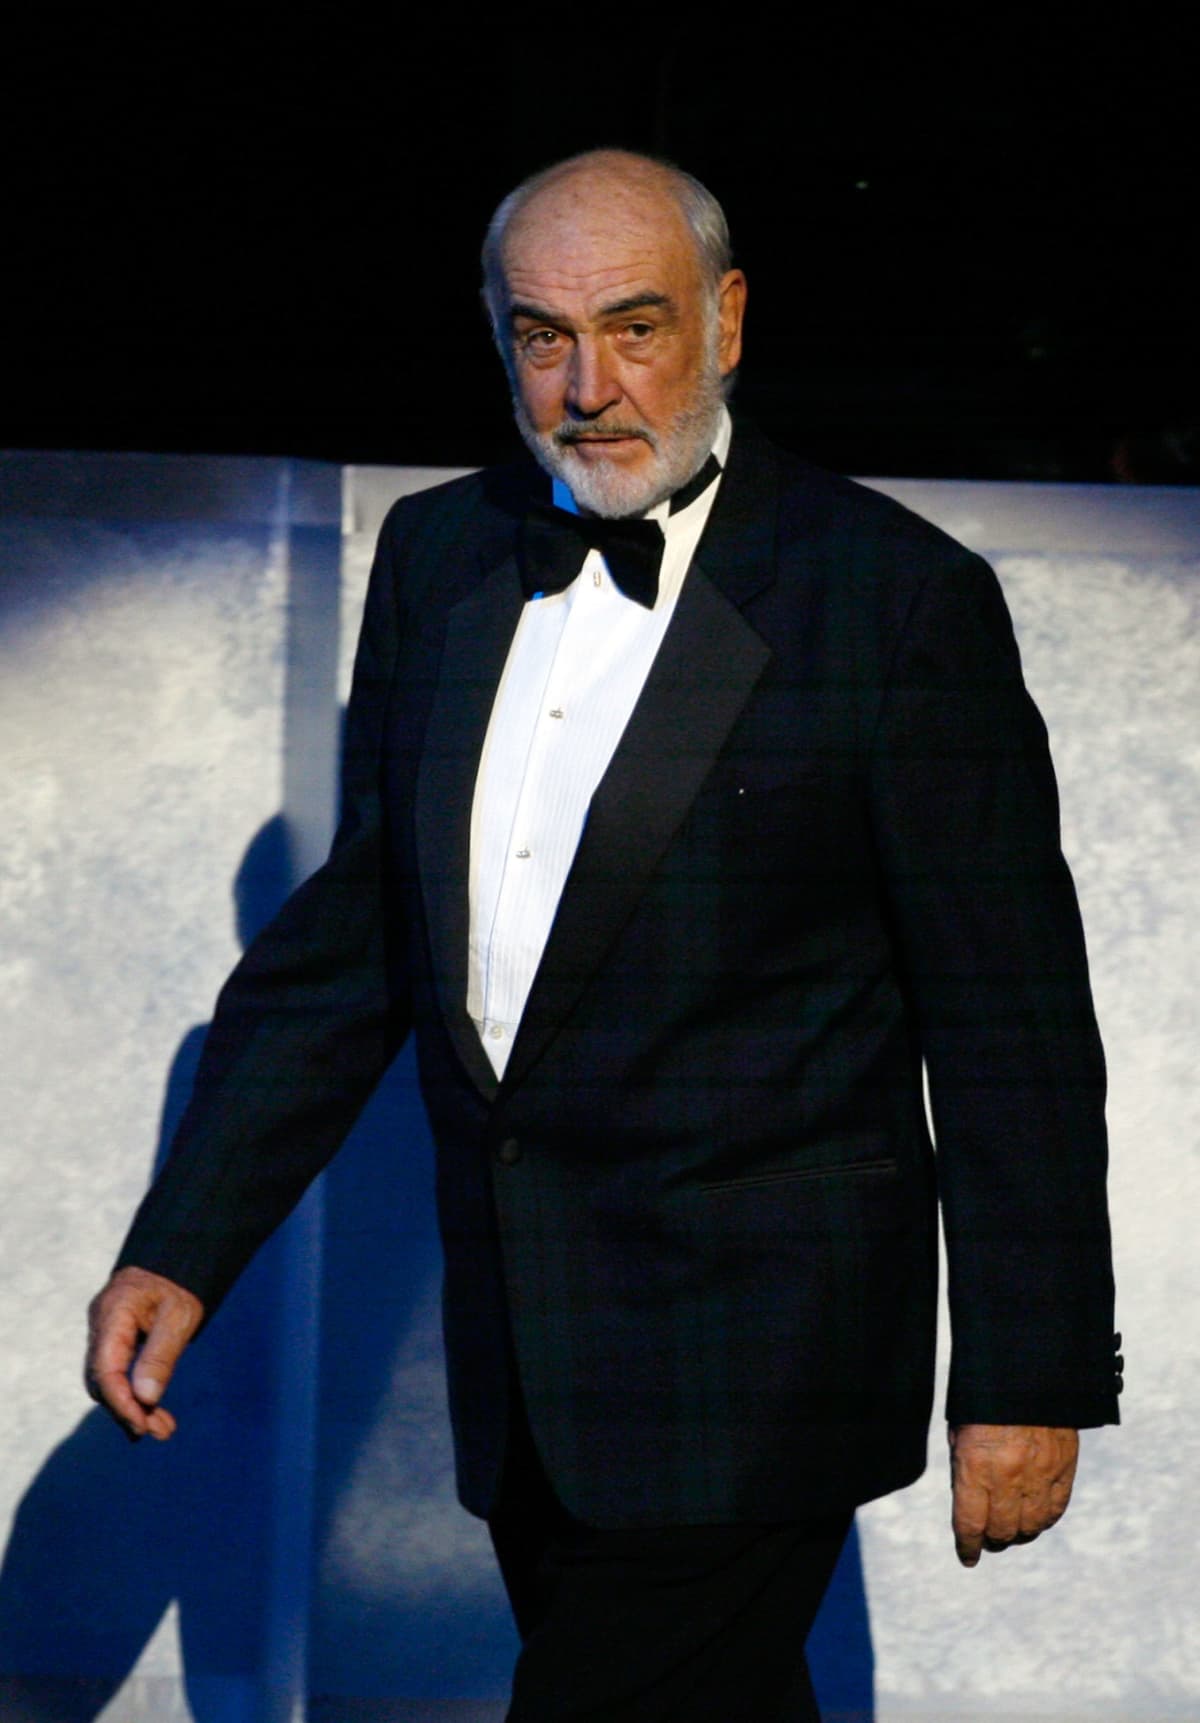 NEW YORK - APRIL 05:  Sir Sean Connery attends the 8th annual "Dressed To Kilt" Charity Fashion Show presented by Glenfiddich at M2 Ultra Lounge on April 5, 2010 in New York City.  (Photo by Andrew H. Walker/Getty Images)